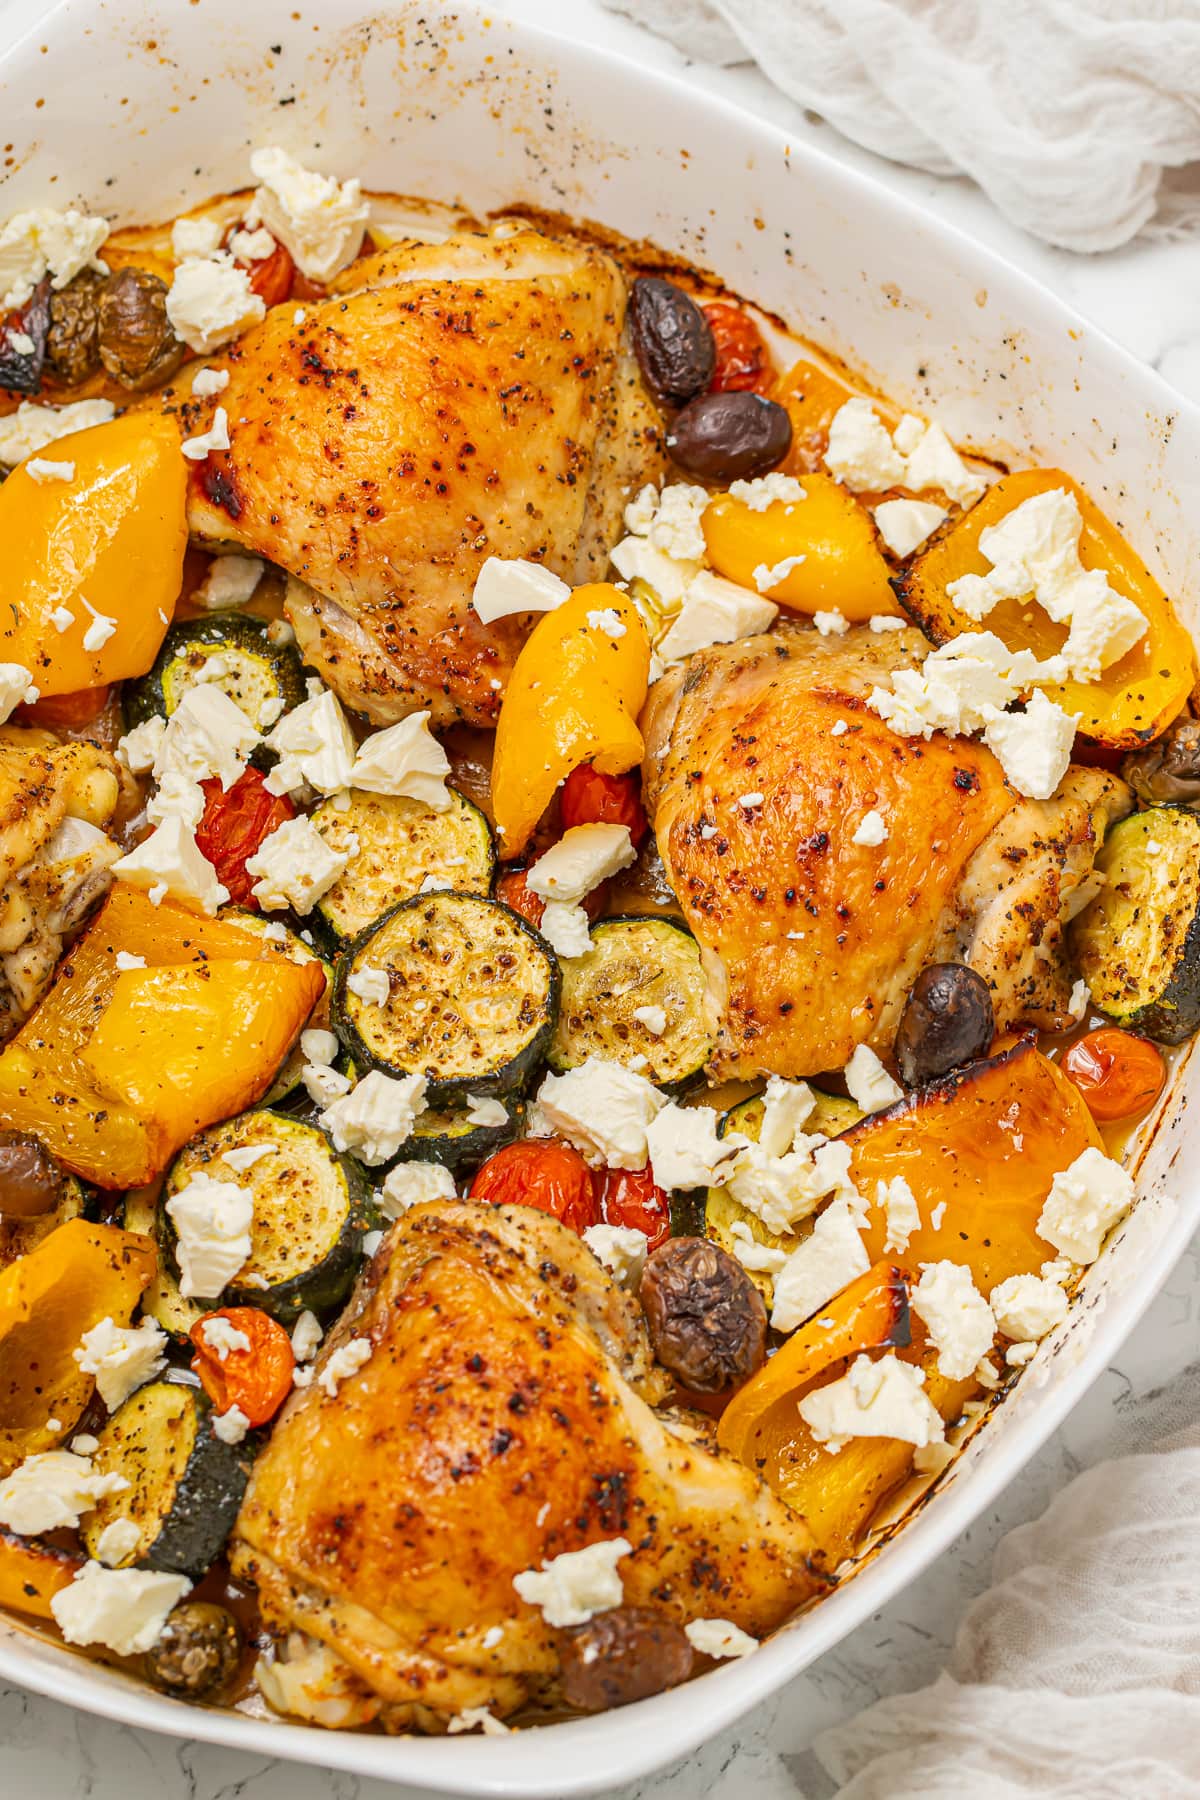 Roasted Greek chicken with bell peppers, tomatoes, zucchini, olives, and crumbled feta cheese in a white baking dish.